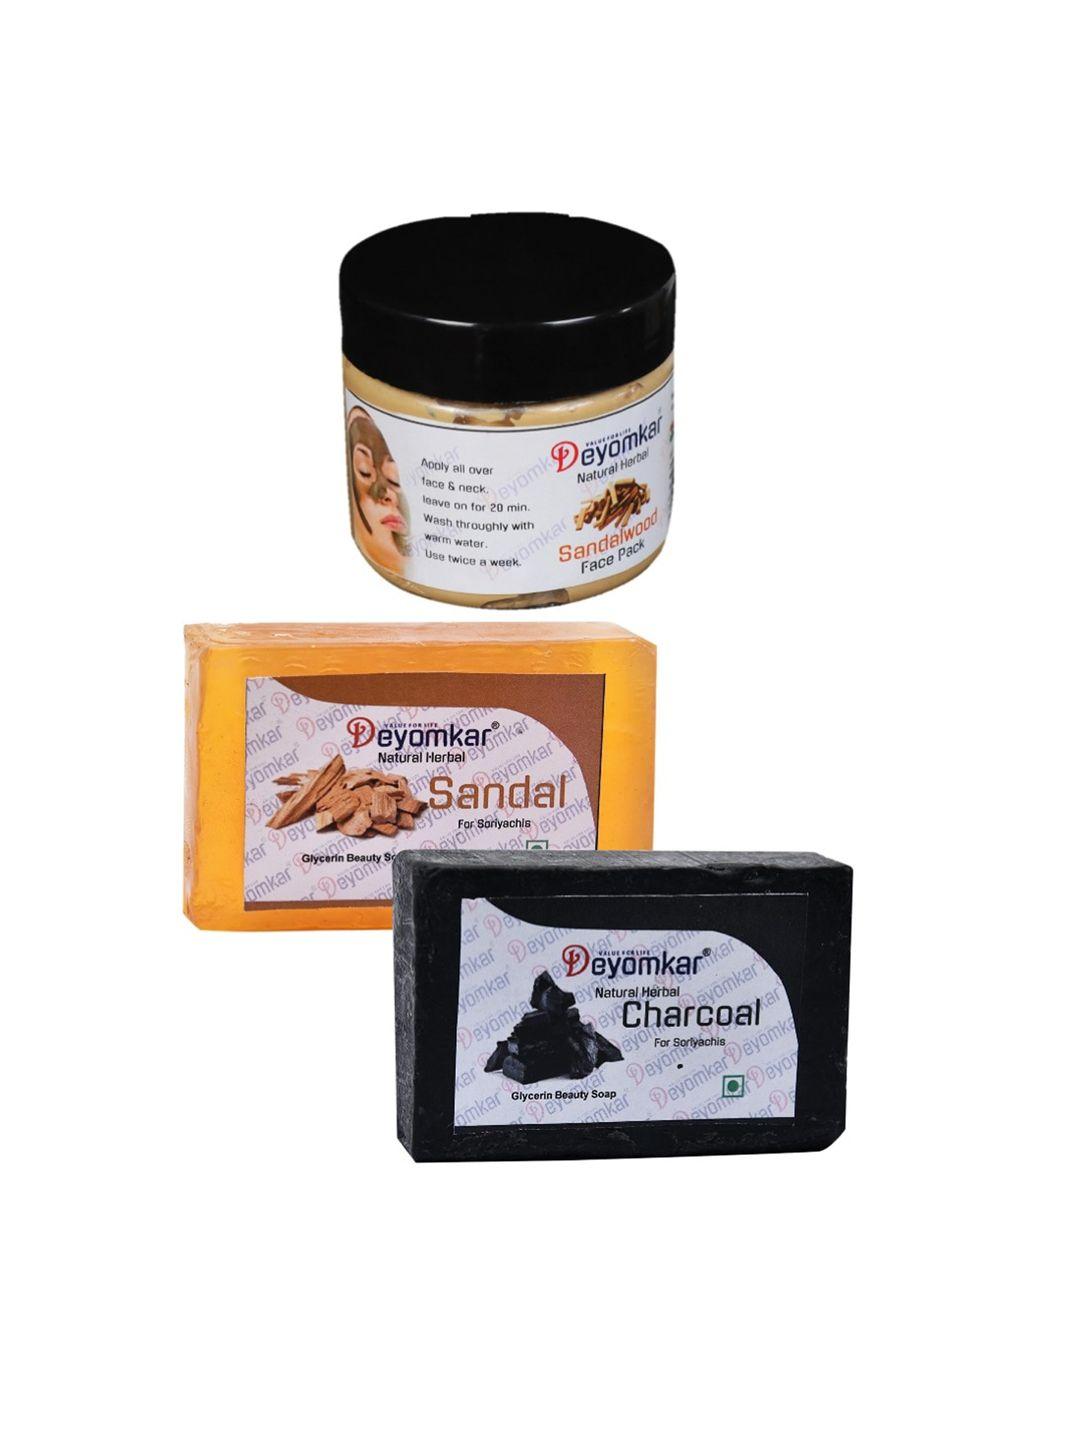 deyomkar herbal sandalwood face pack with sandalwood soap and charcoal soap combo